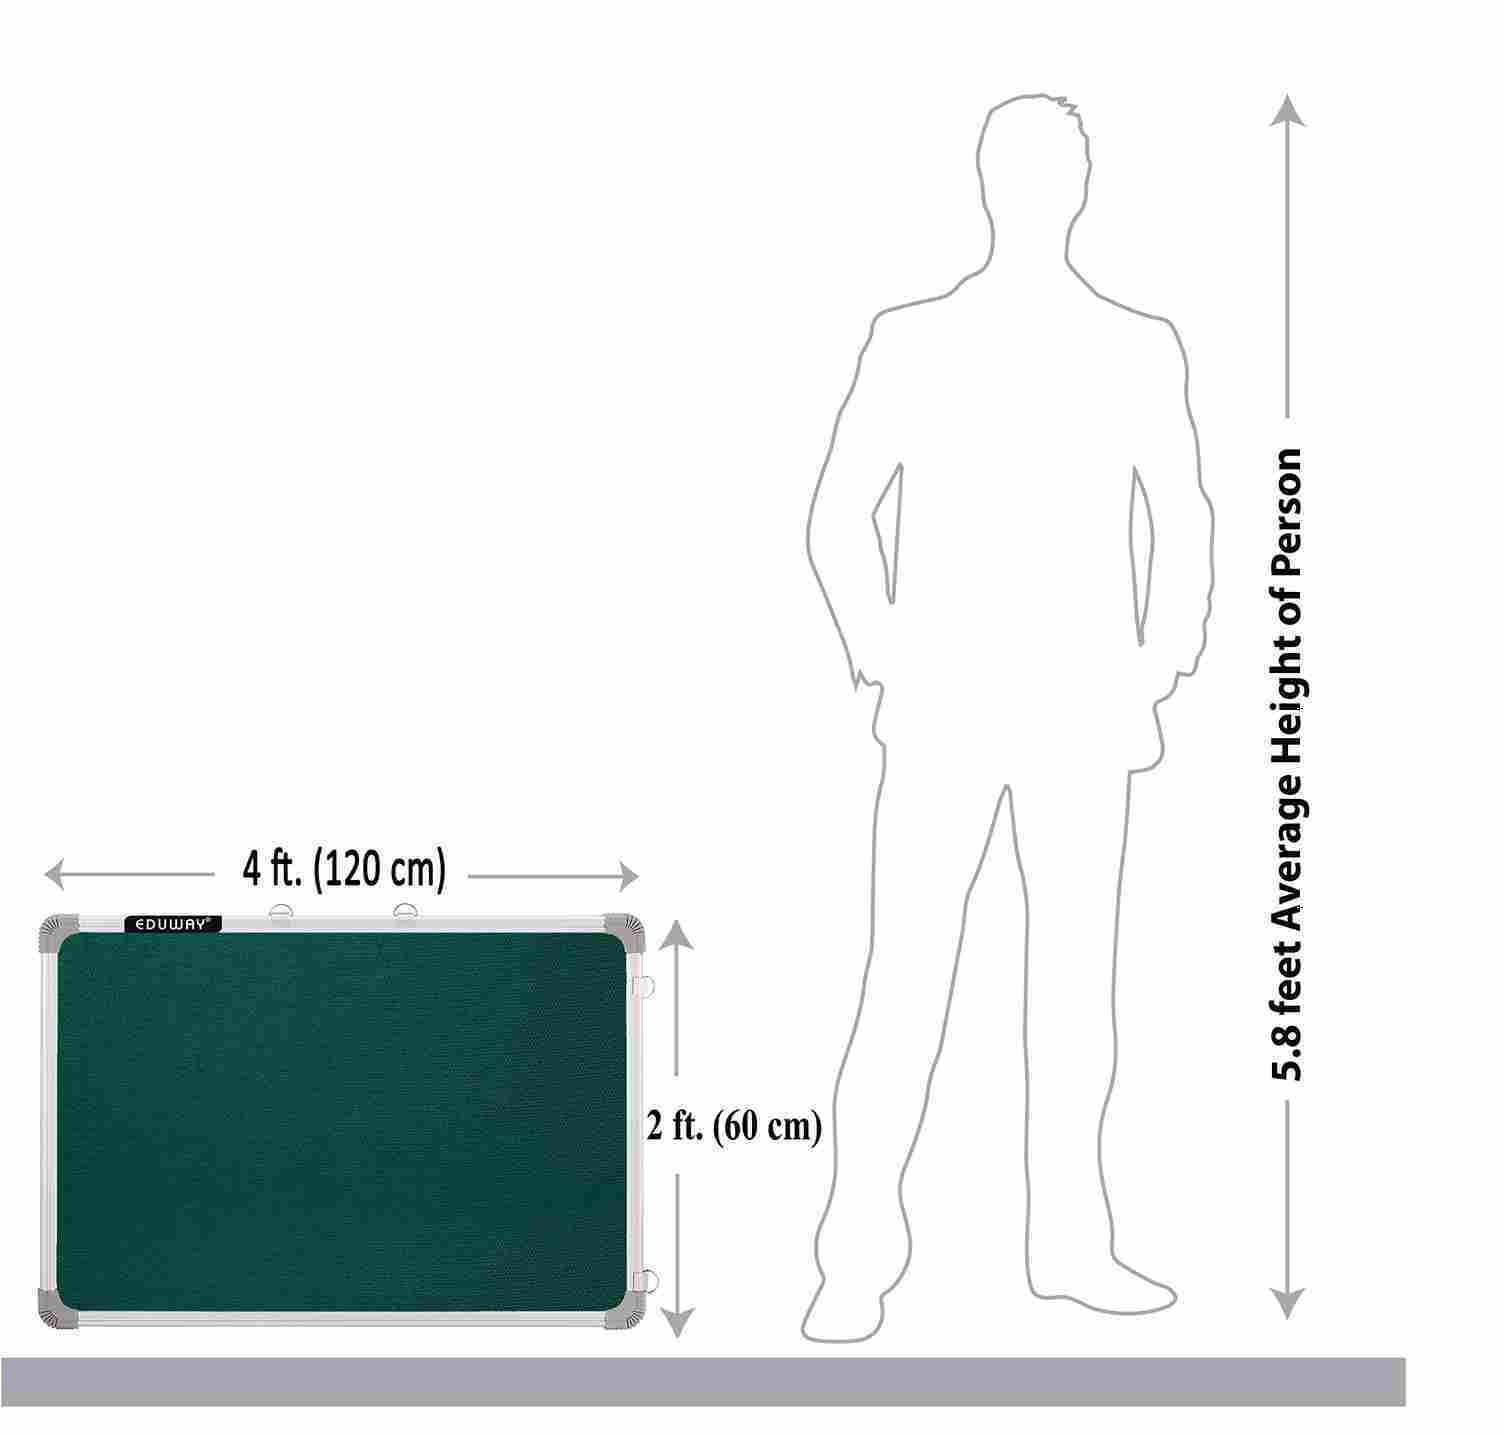 Buy 4x2 ft. Green Notice Board with High Resilience Foam Fabric